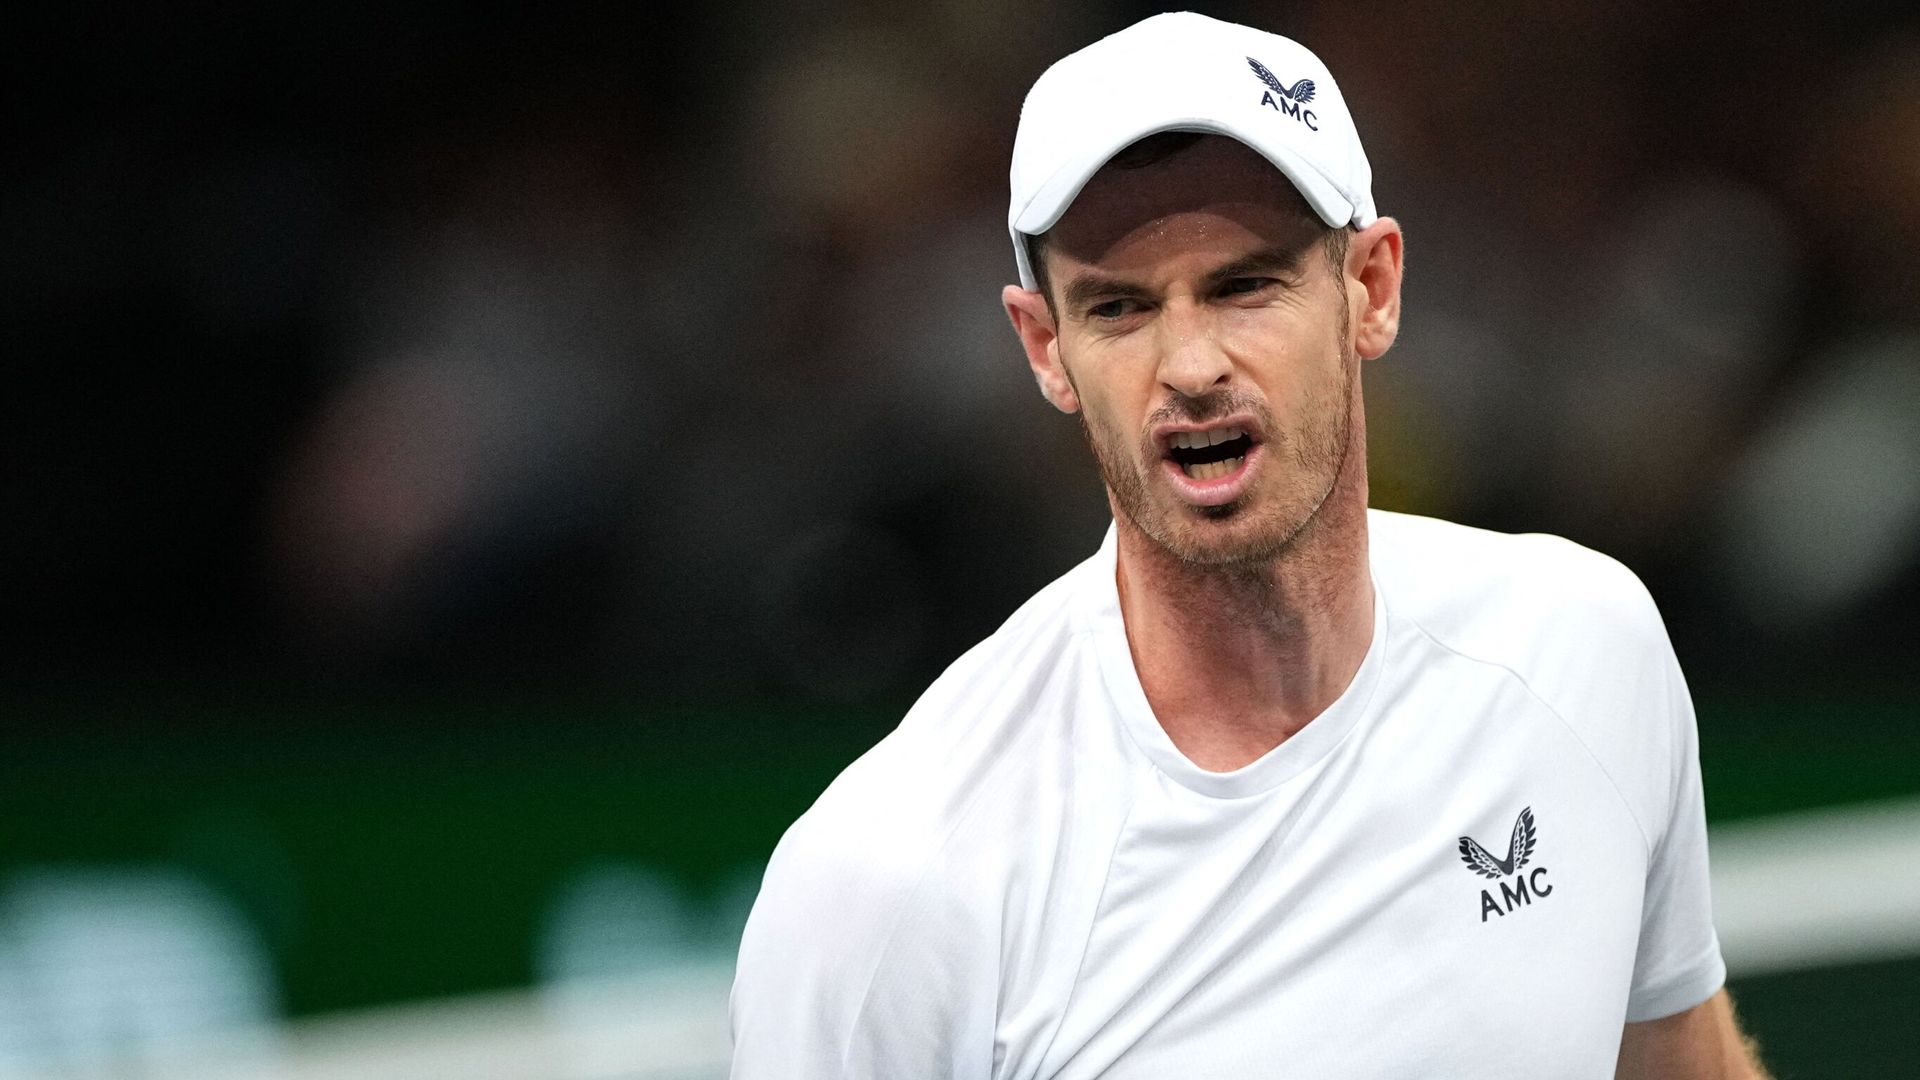 Murray: It's frustrating! I'm not enjoying my tennis just now